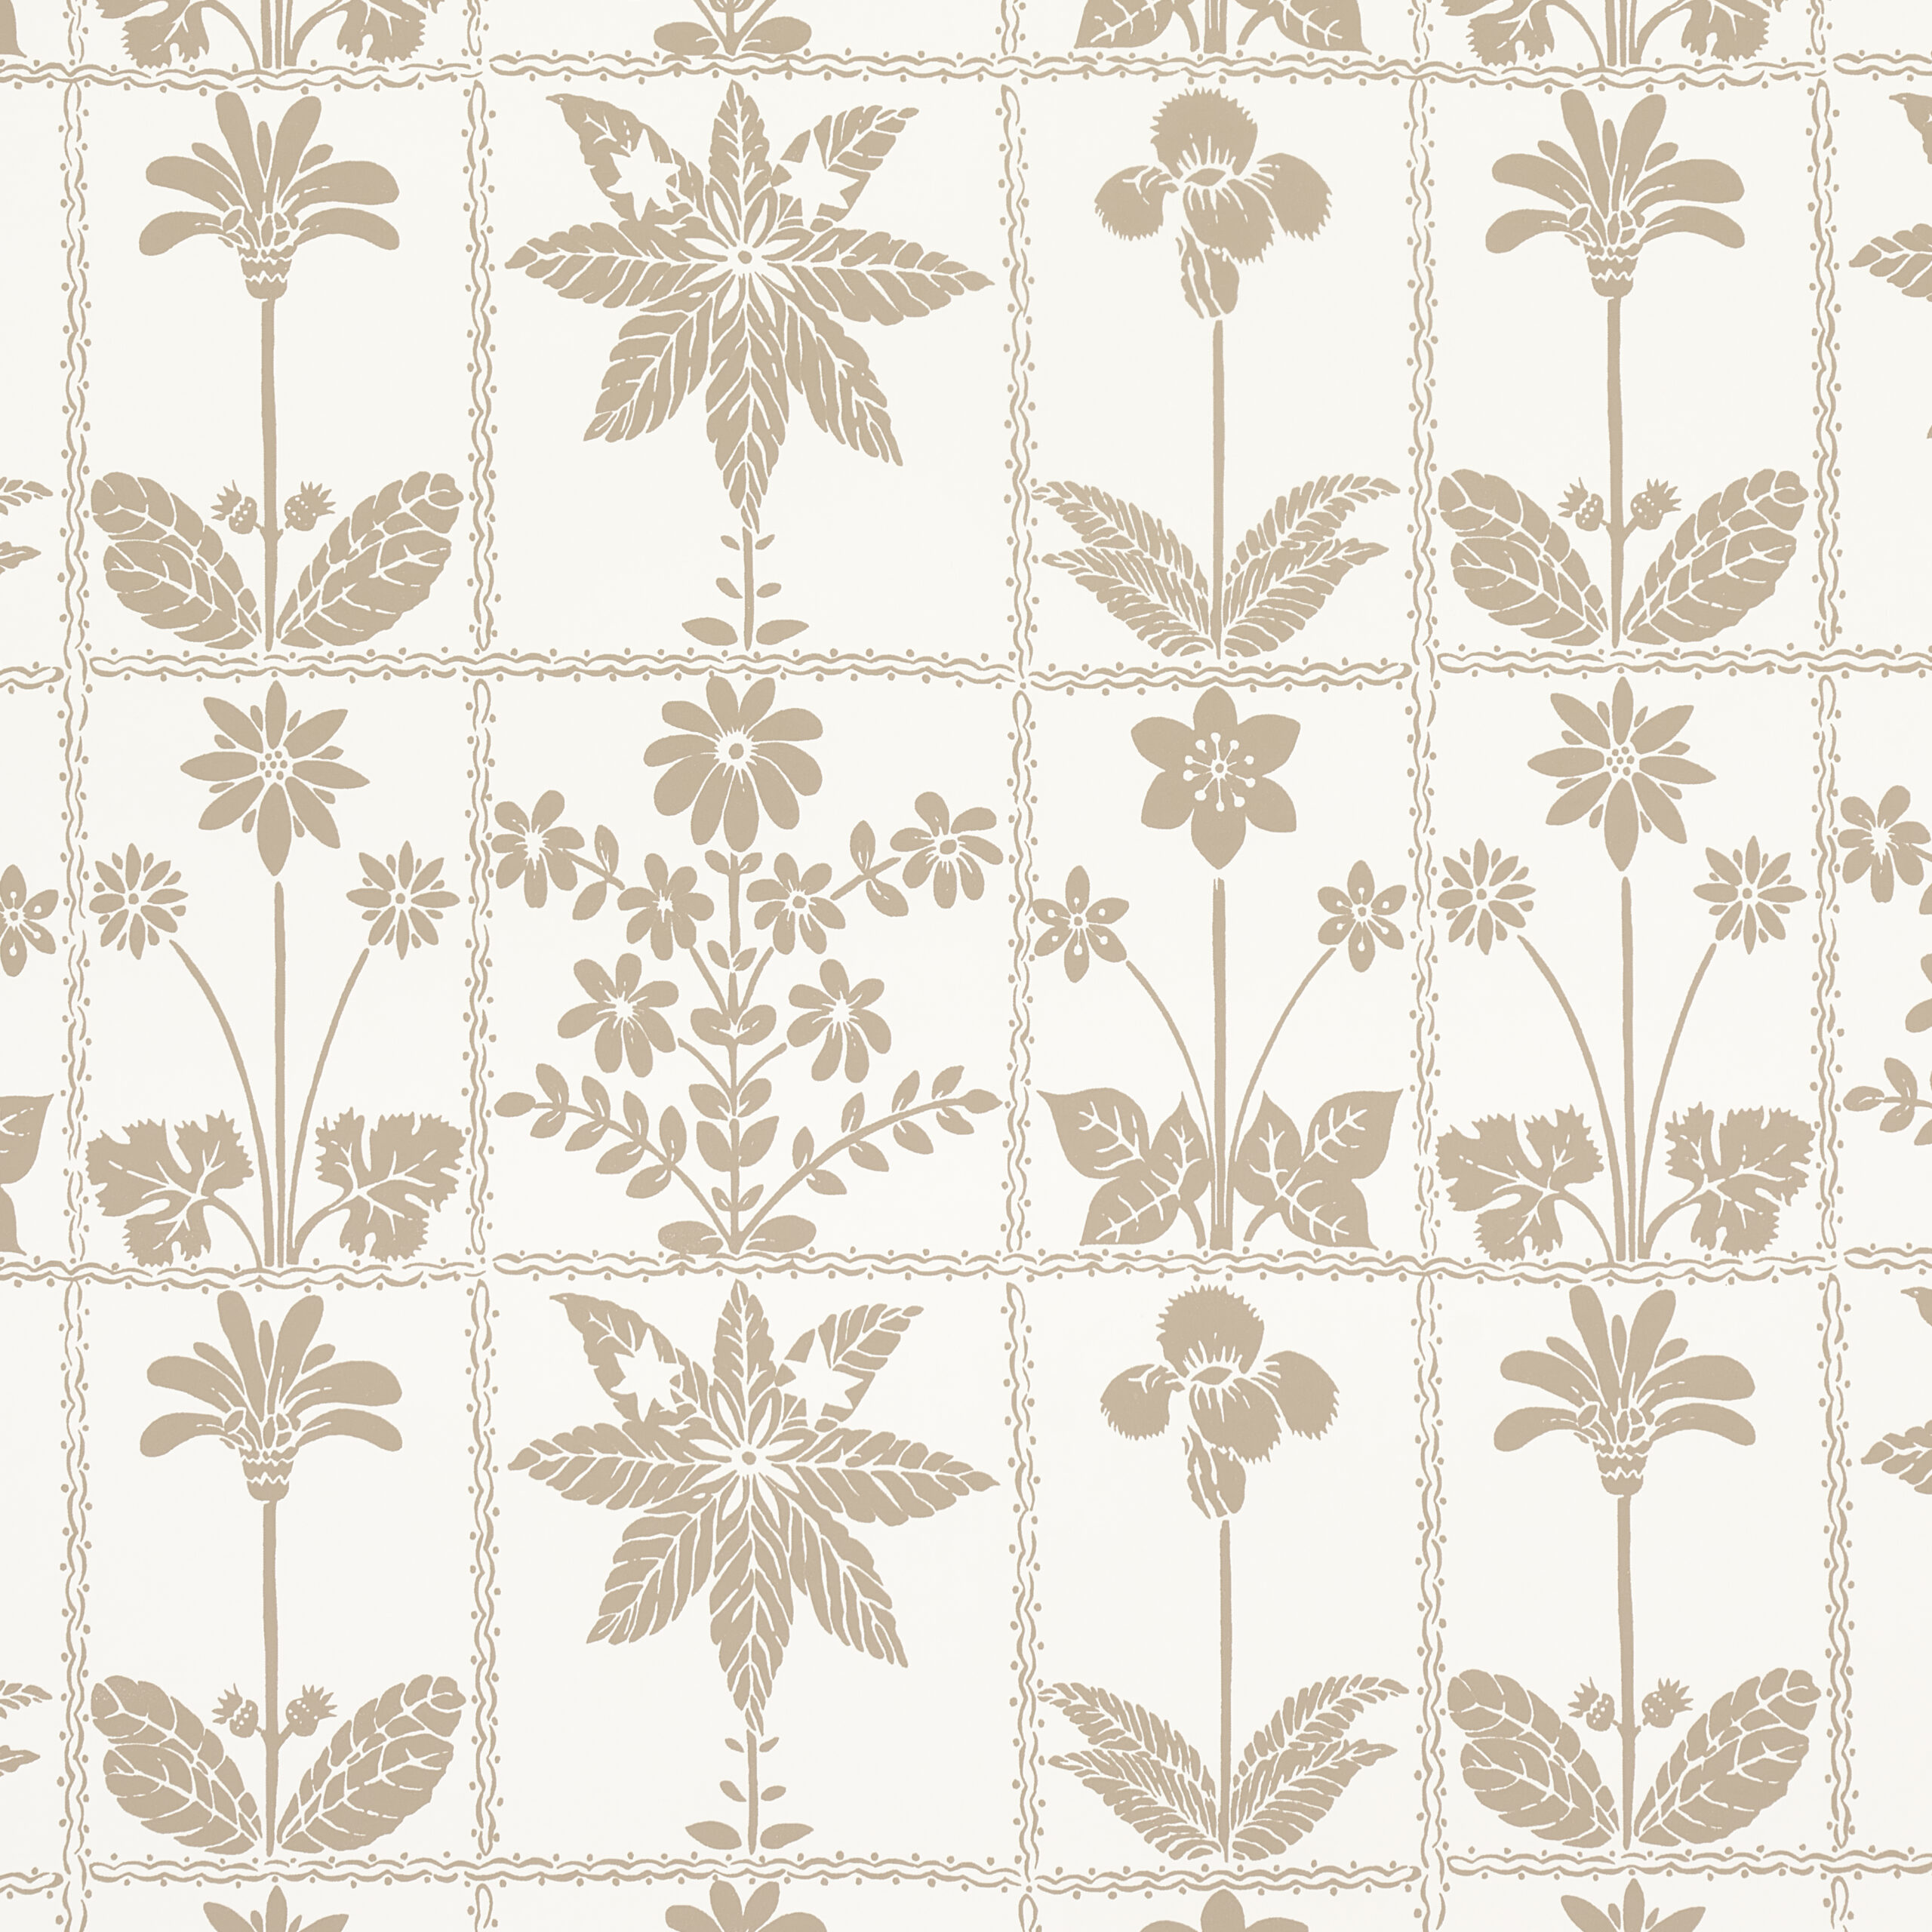 Schumacher Georgia Wildflowers Wallpaper in Neutral, from the Folly Cove collection